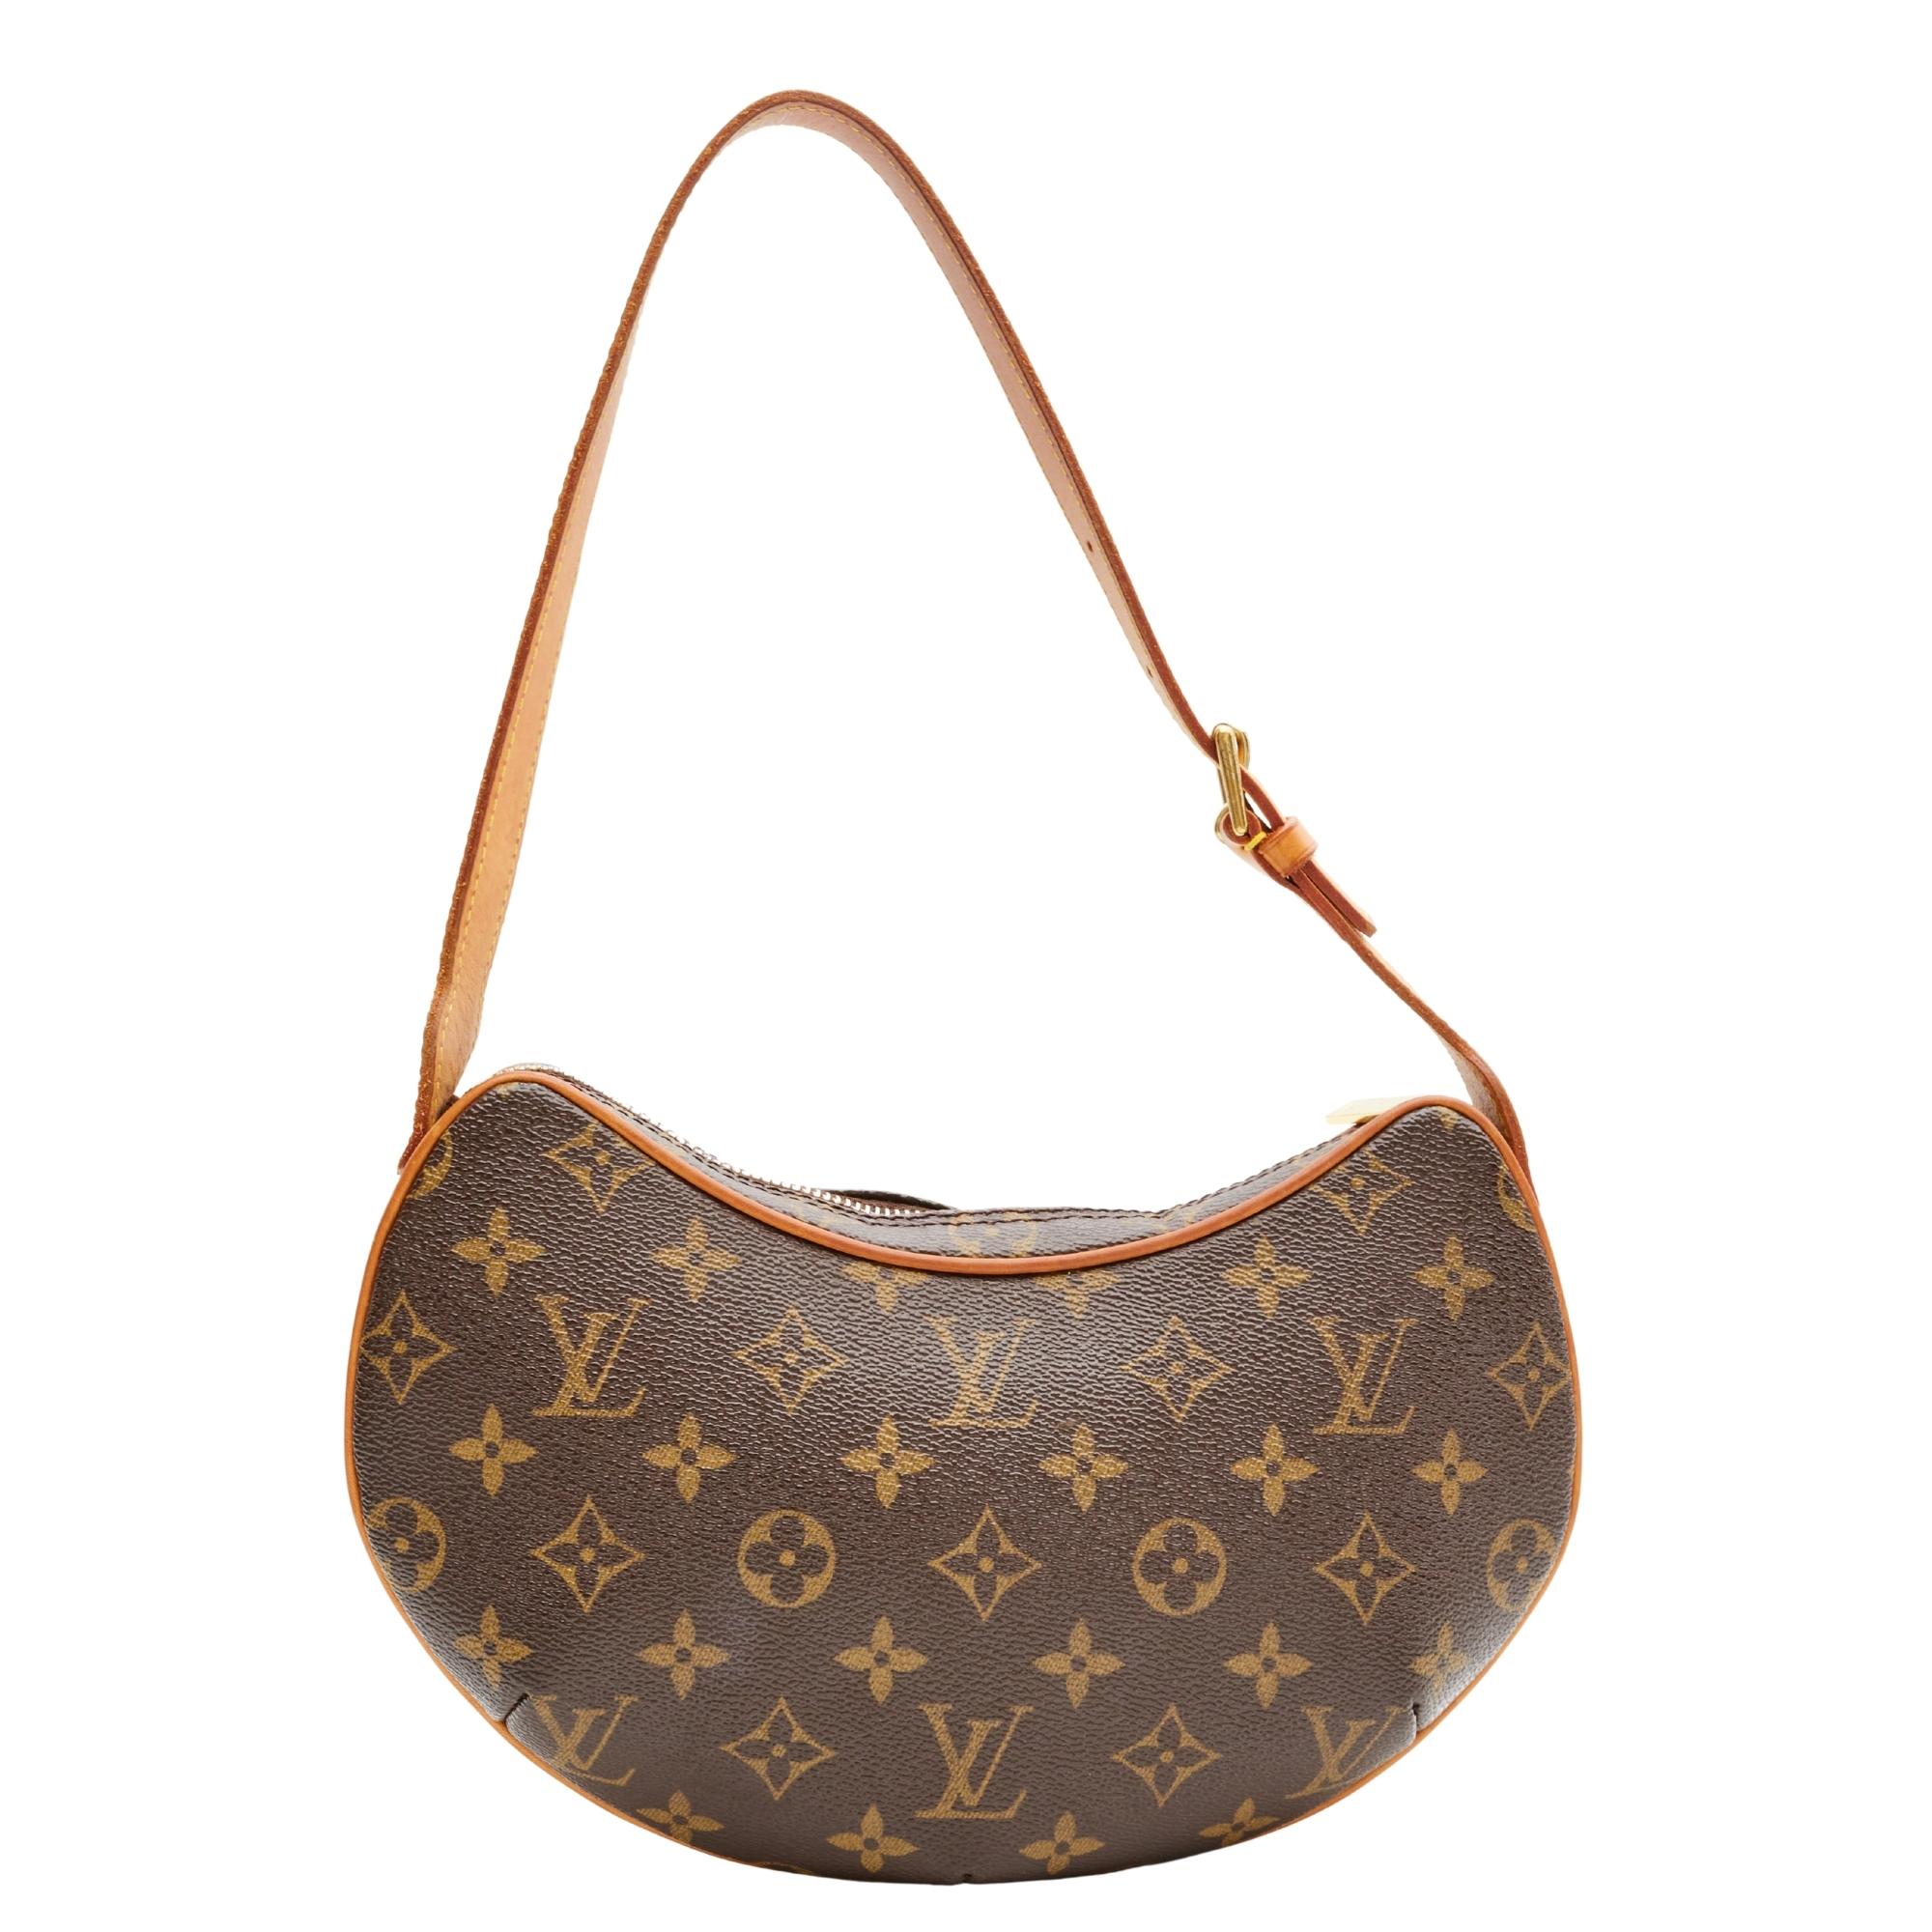 This pochette is made with classic Louis Vuitton monogram coated canvas. The bag features a vachetta cowhide leather trim and details, a looping leather top handle, polished brass hardware, top zip closure and a rouge red microfiber interior with a